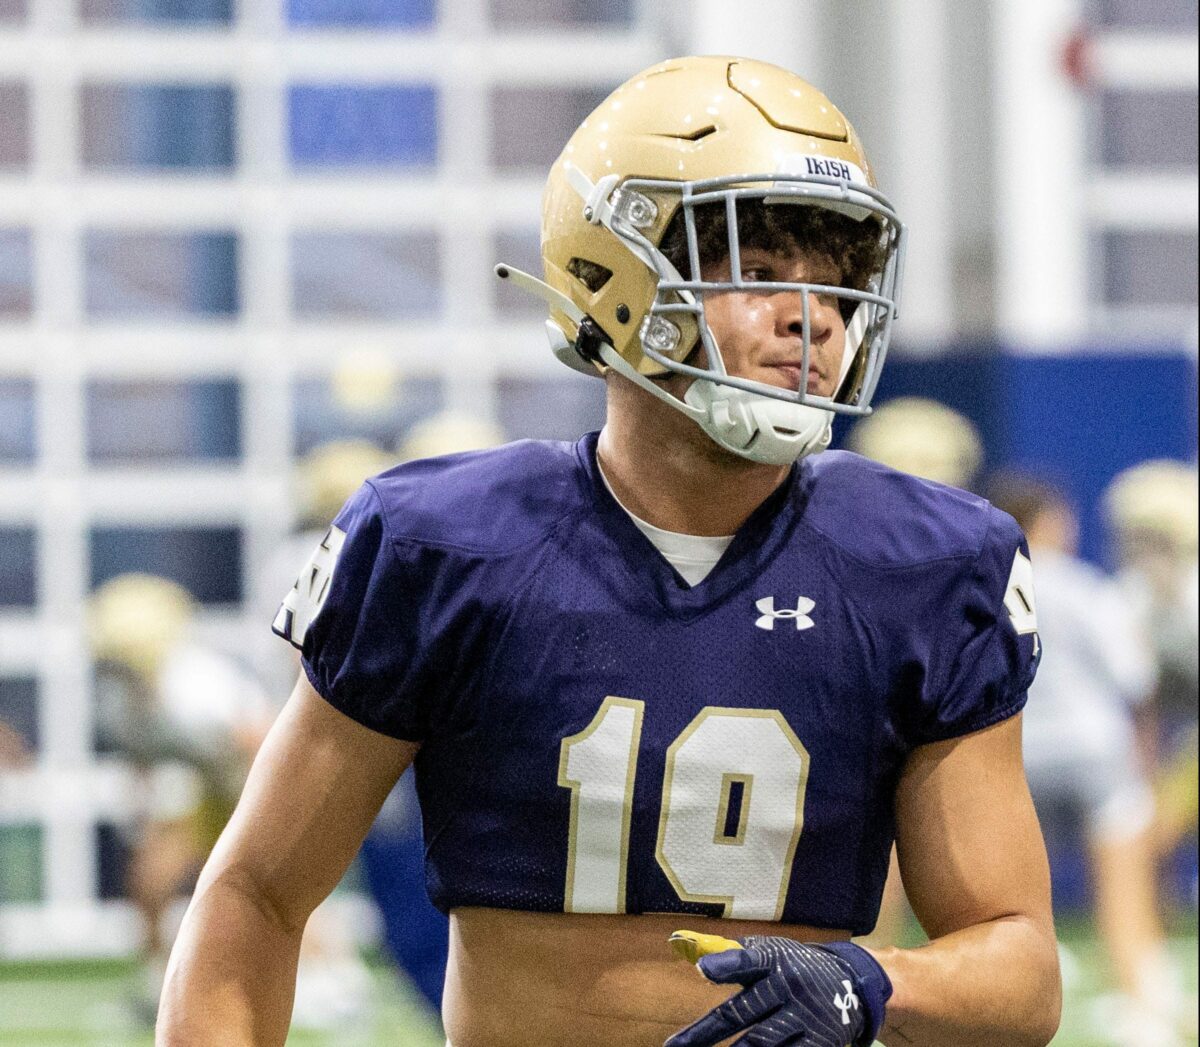 247Sports believes this Notre Dame true freshman will have a impact this year